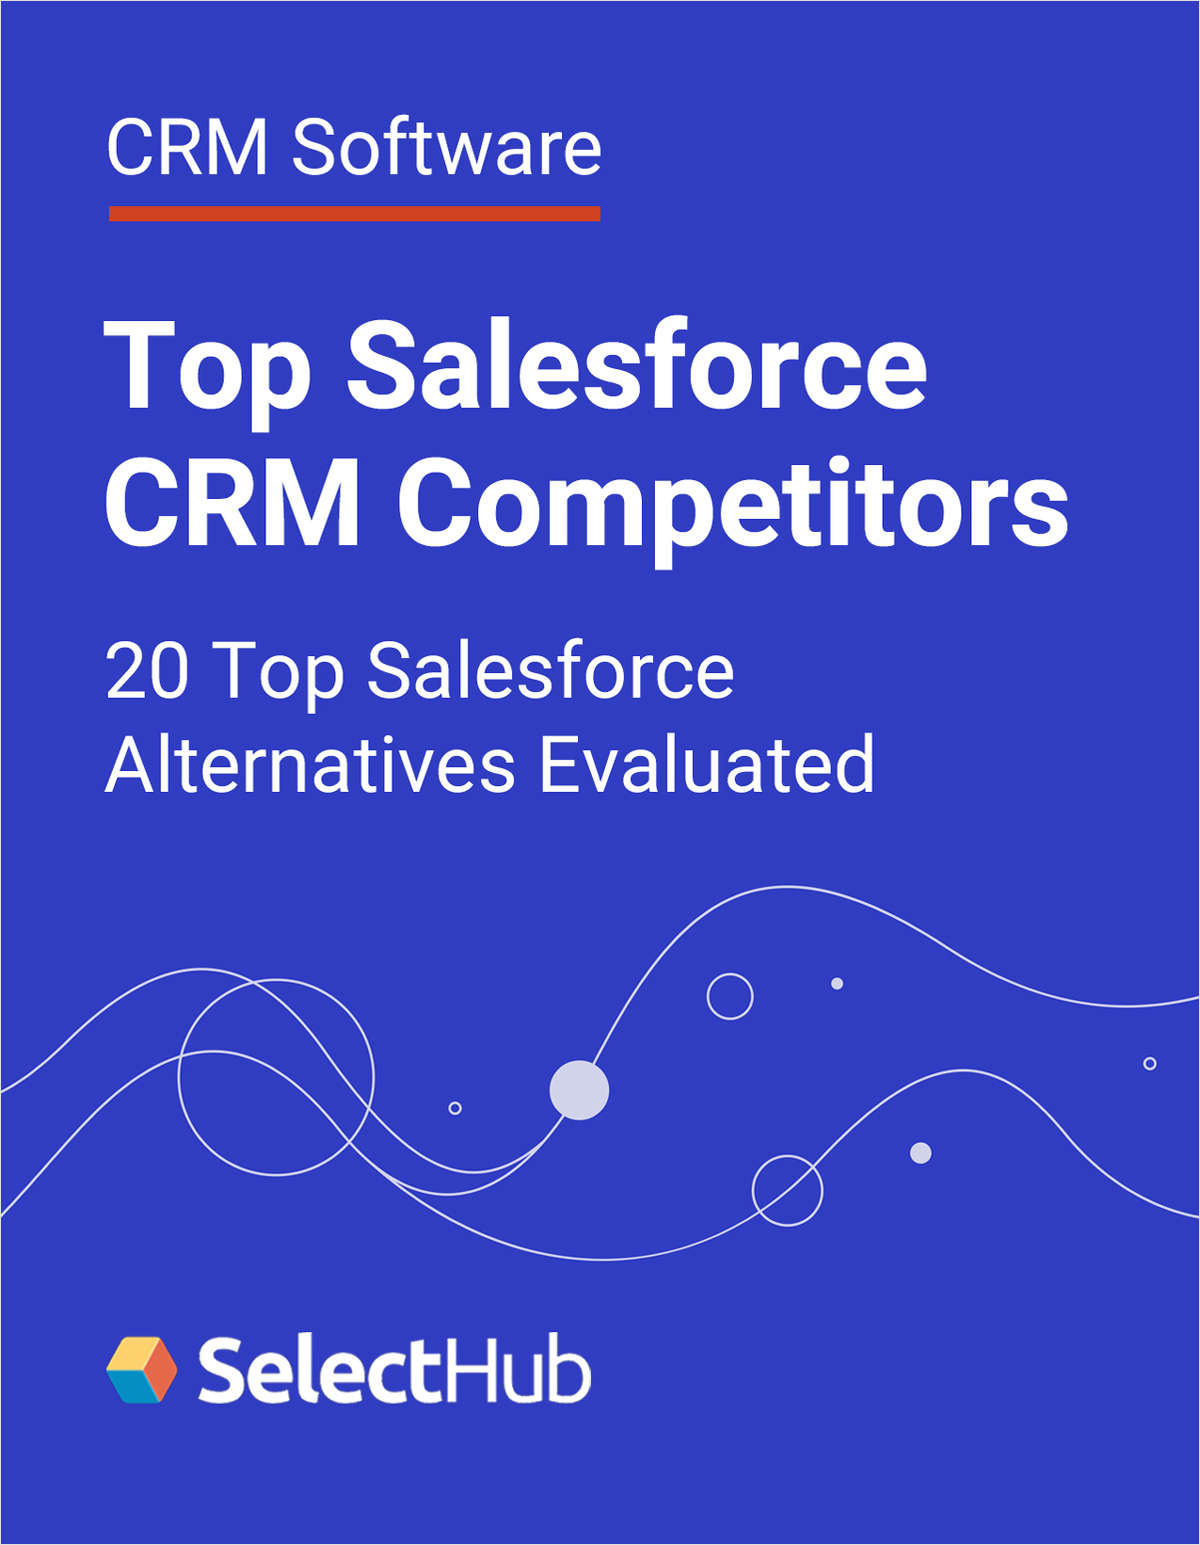 Salesforce CRM Software Competitors--Expert Analysis, Recommendations & Pricing